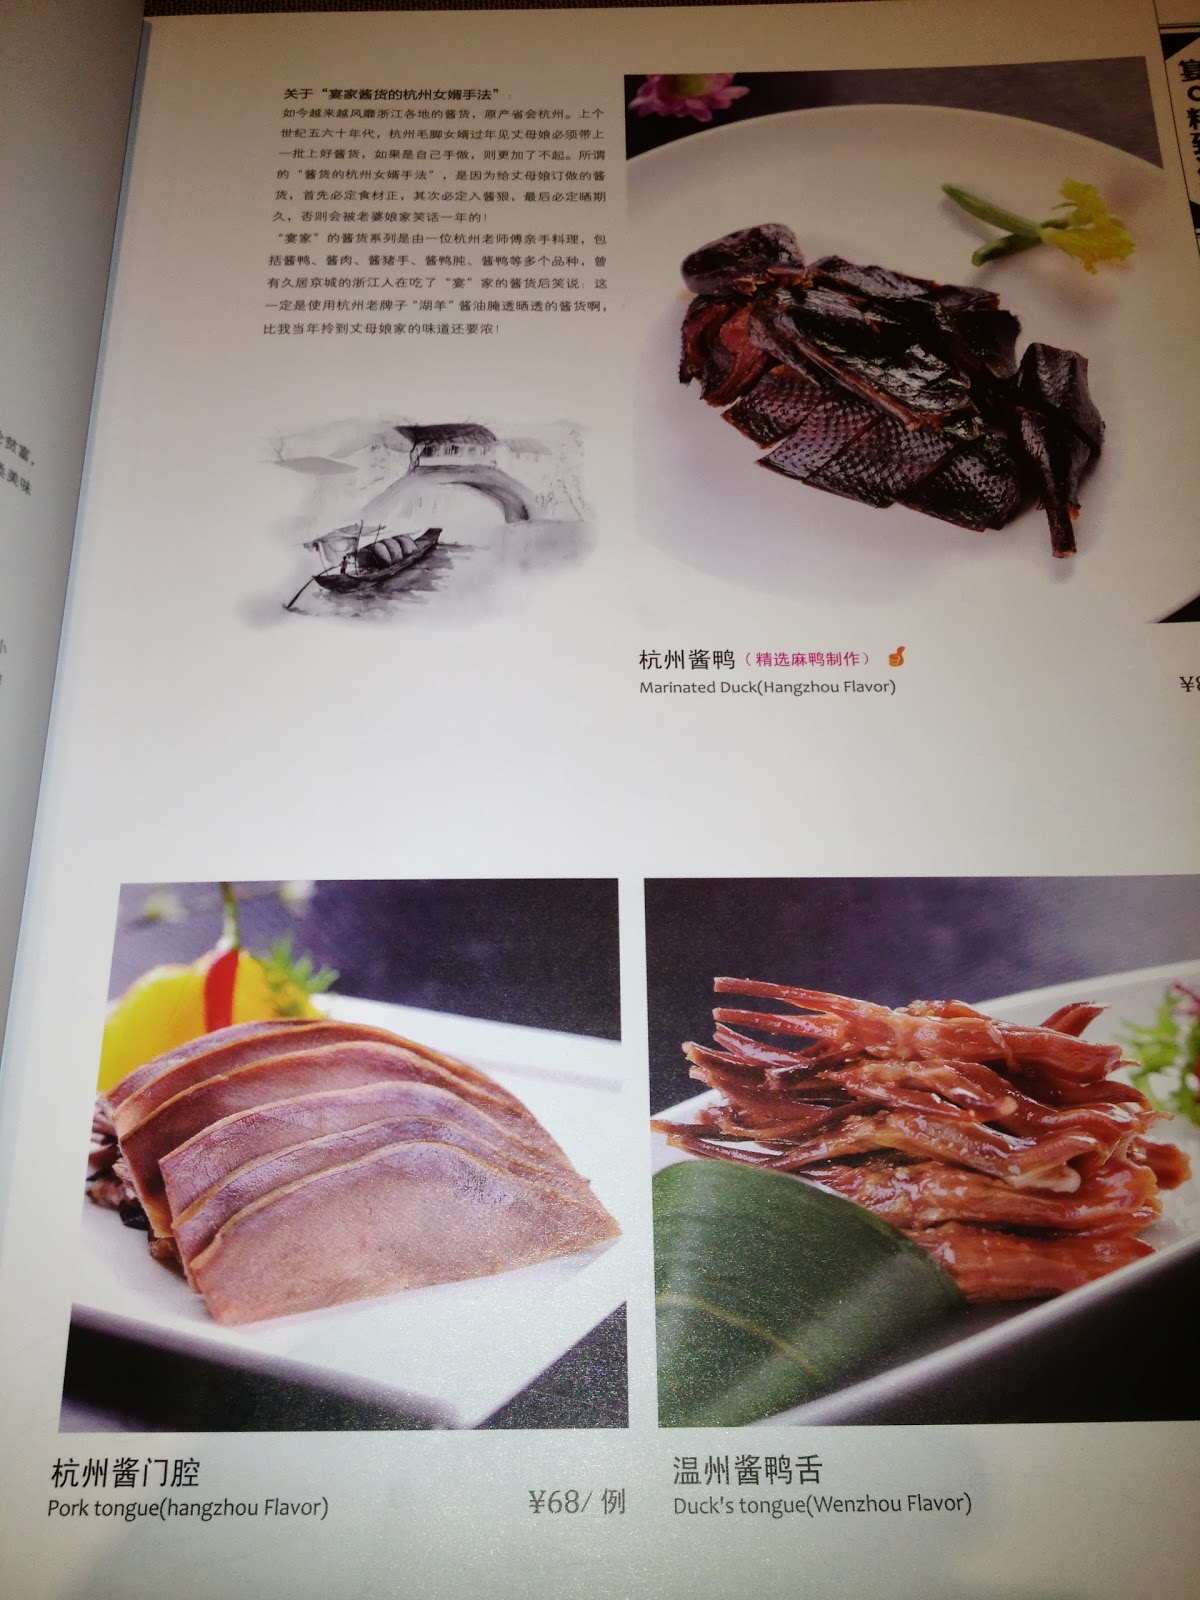 Upper right: a whole duck; lower right: just the tongues; lower left: pig tongue